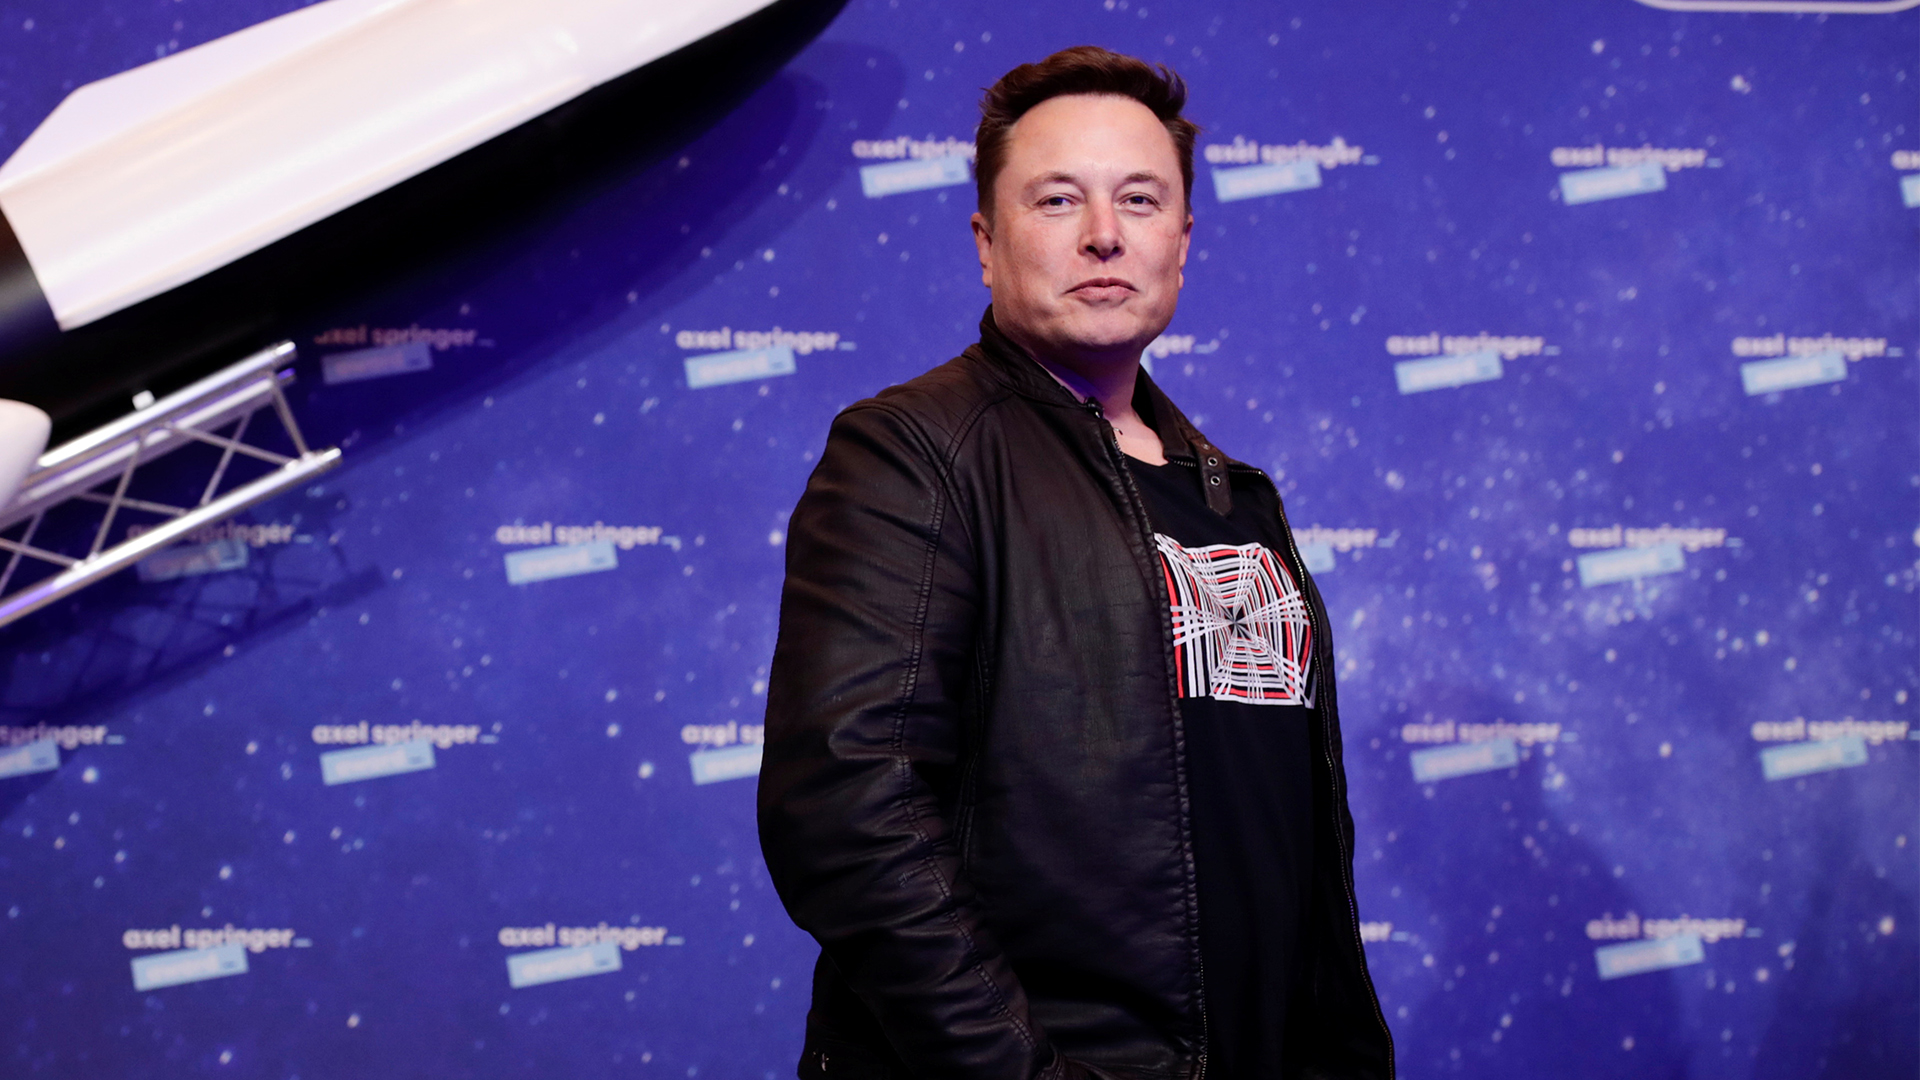 Elon Musk Makes Multi-Billion Dollar Offer To Buy Out Twitter With Plans "To Unlock Its Potential"